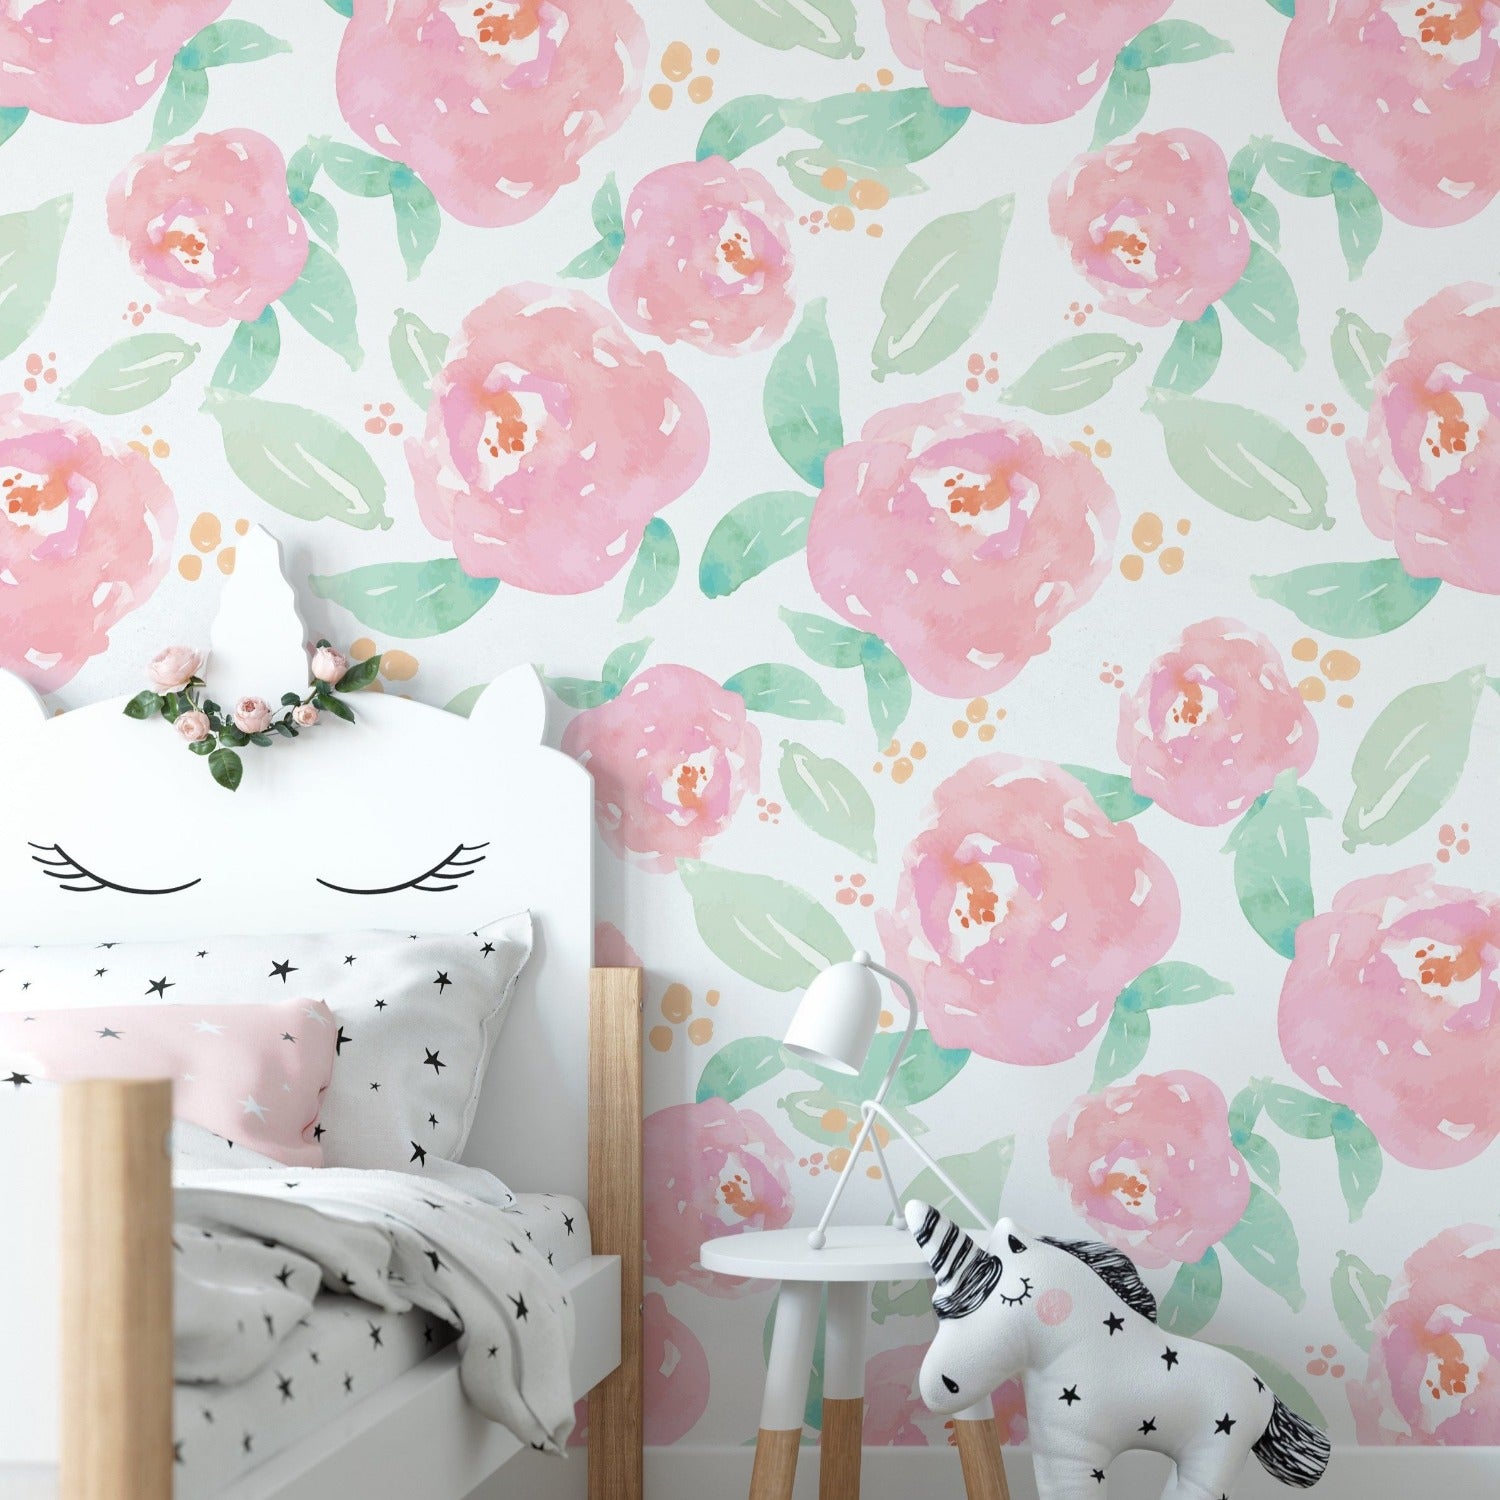 Child's nursery room showcasing walls covered with bright pink peony floral wallpaper and modern furniture